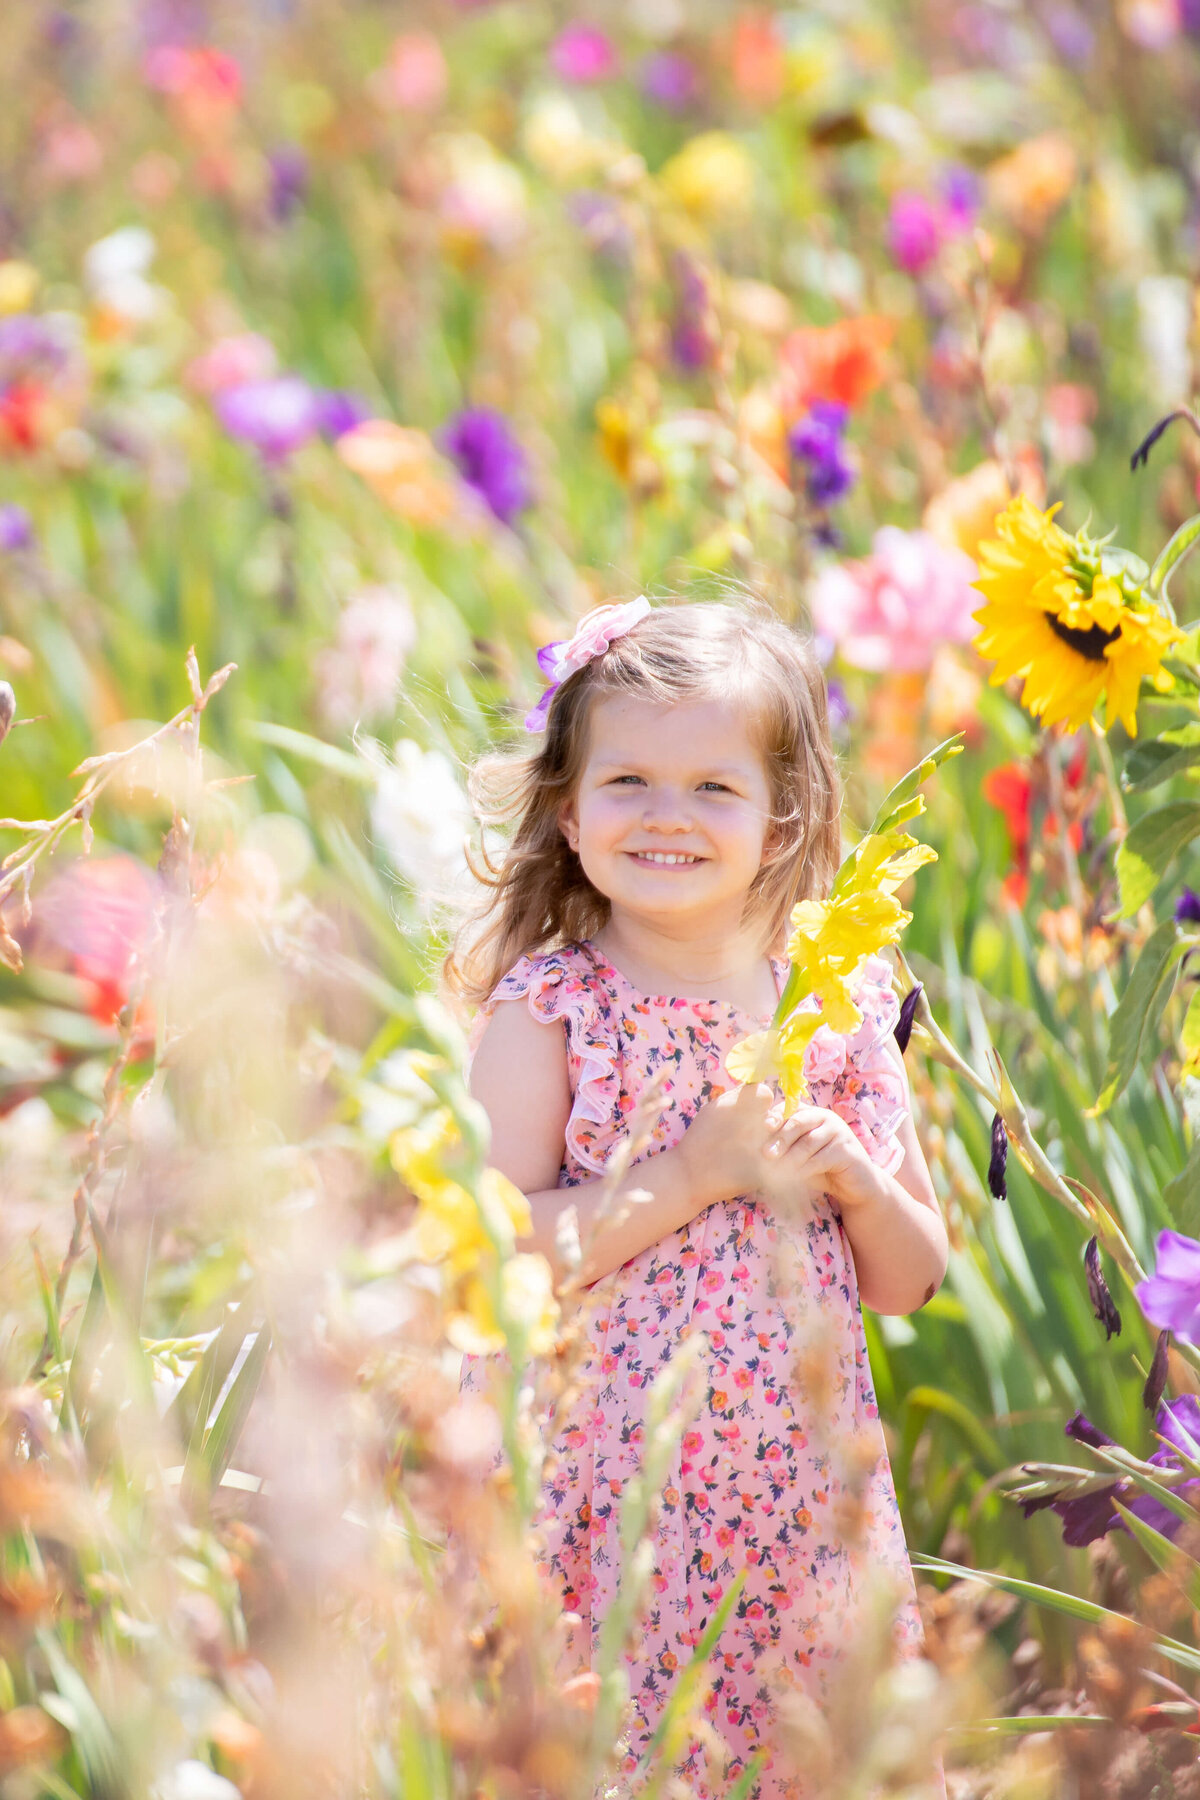 My daughter surrounded by a beautiful field of flowers in Germany.